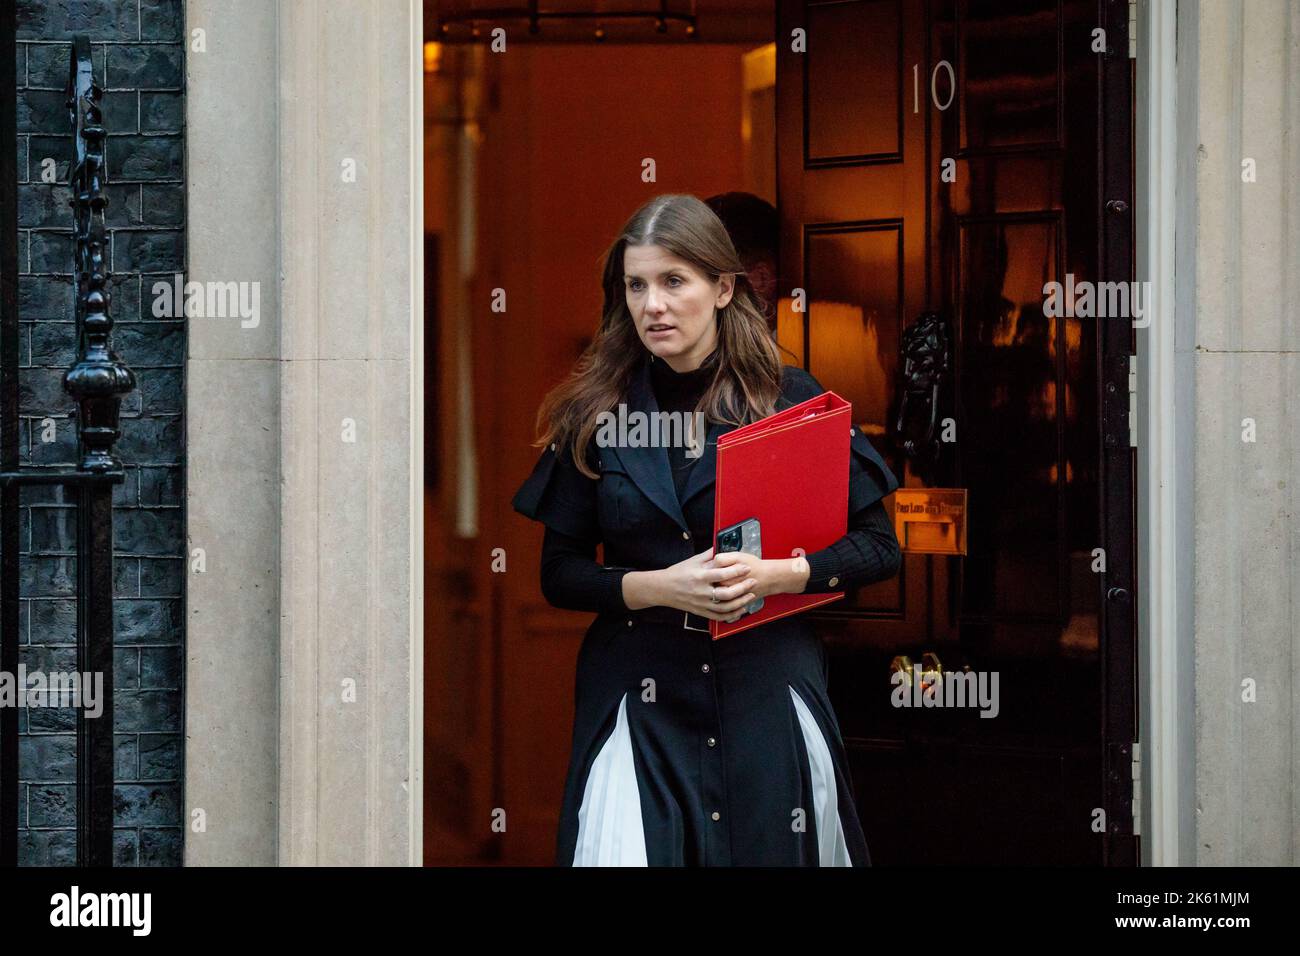 Downing Street, London, UK. 11th October 2022. Ministers attend the first Cabinet Meeting at 10 Downing Street since the Conservative Party Conference last week. Michelle Donelan MP, Secretary of State for Digital, Culture, Media and Sport.  Amanda Rose/Alamy Live News Stock Photo